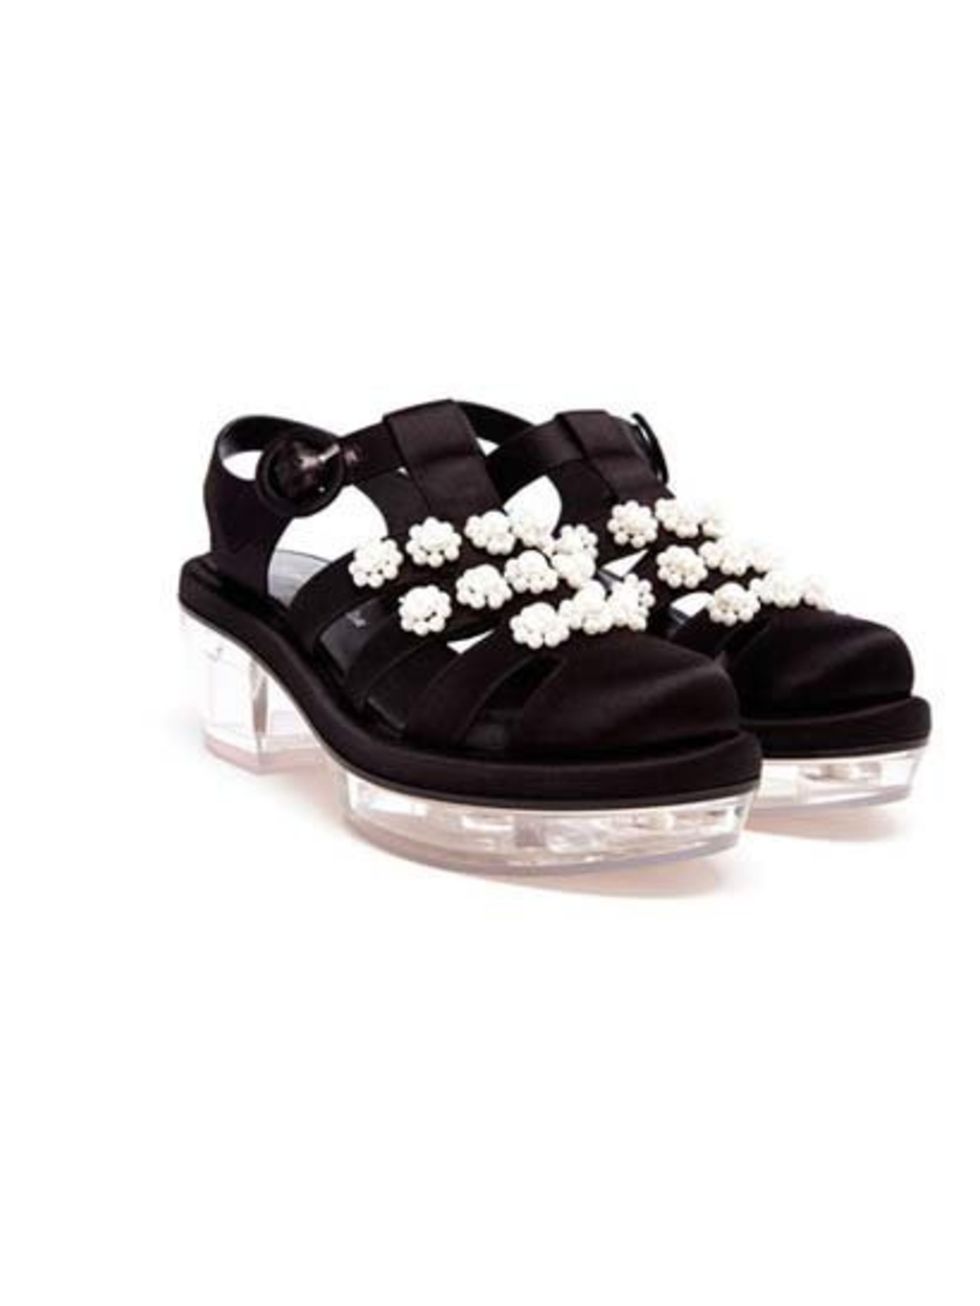 <p>Perspex and satin sandals with Simone's floral pearl embellishment, are £915 at <a href="http://www.brownsfashion.com/product/038S52740003/027/pearl-embellished-satin-sandals">Browns</a>.</p>